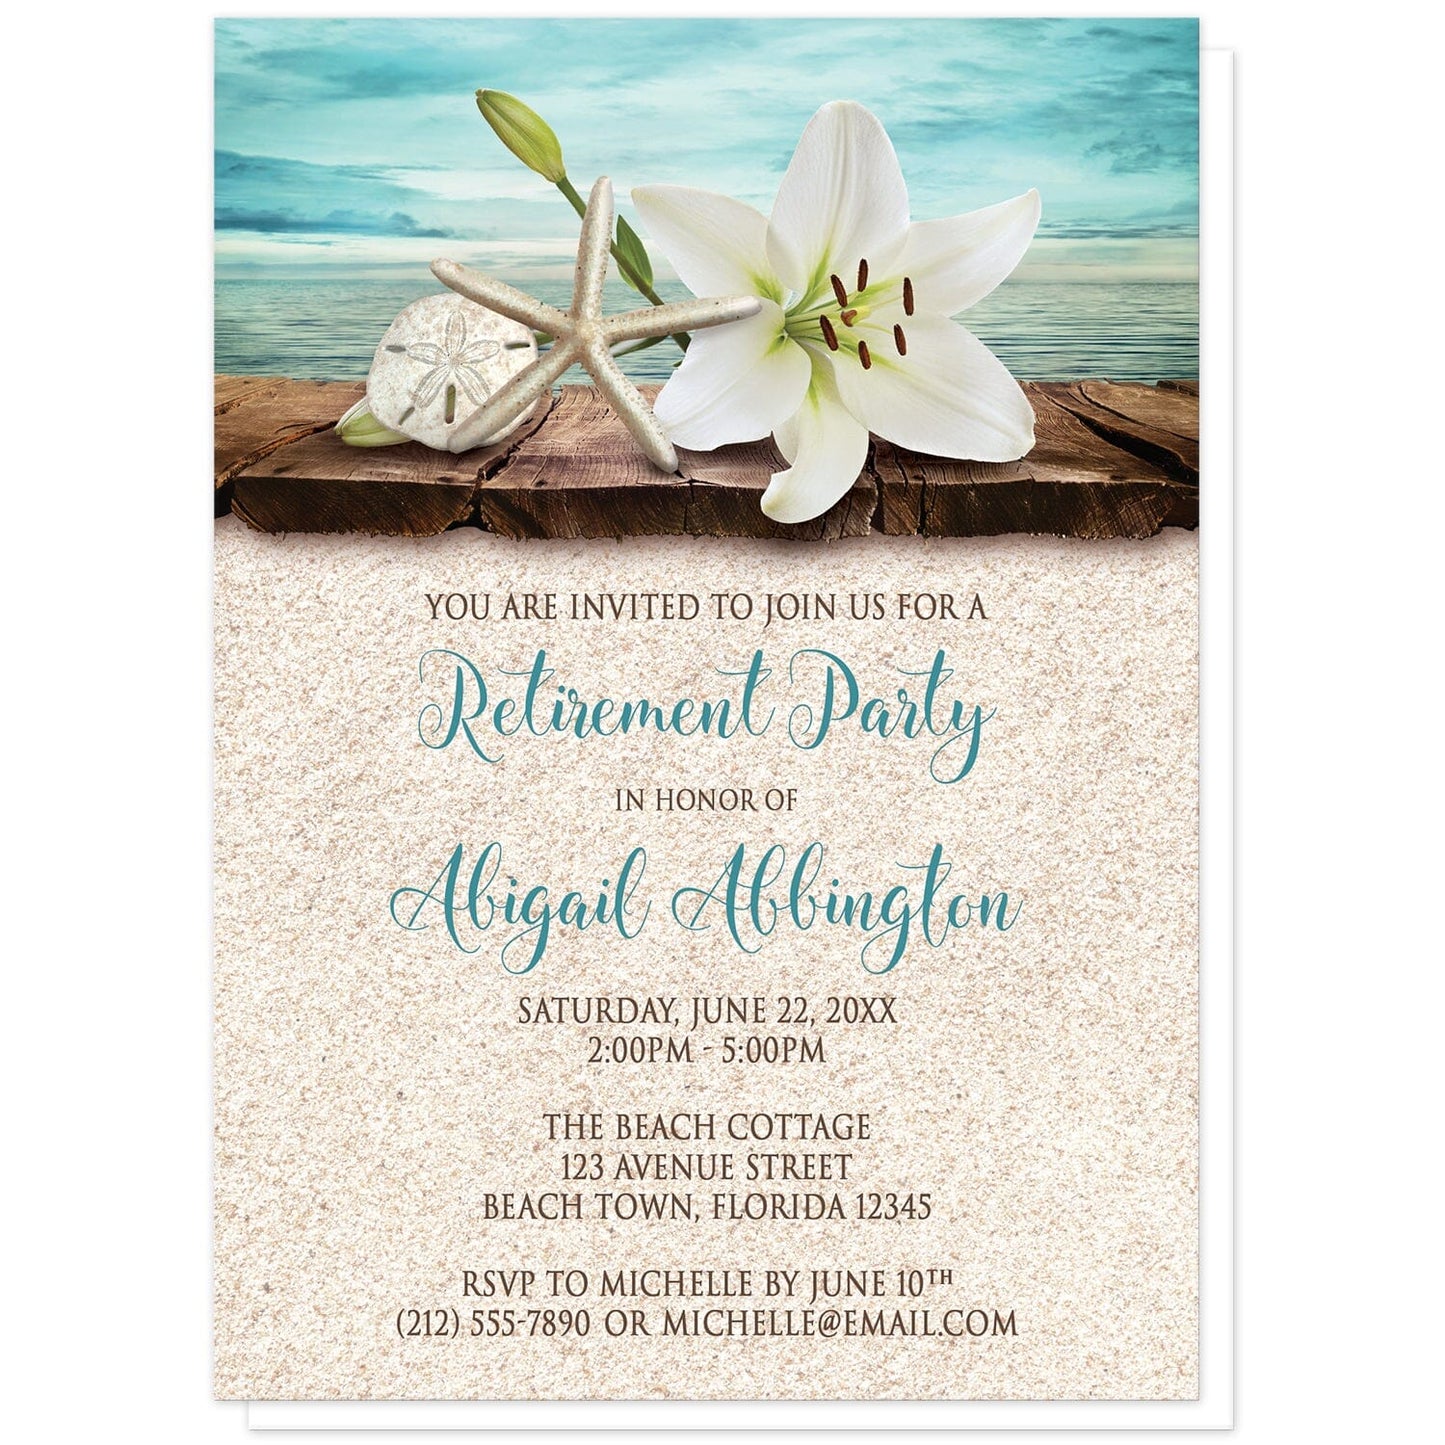 Lily Seashells and Sand Beach Retirement Invitations at Artistically Invited. Floral lily seashells and sand beach retirement invitations with an elegant white lily, a starfish, and a sand dollar on a rustic wood dock overlooking the open water. These tropical lily invitations are fully illustrated in a beach color scheme of teal and turquoise, beige, and brown. Your personalized retirement party details are custom printed in dark brown and teal over a beige sand texture background design.